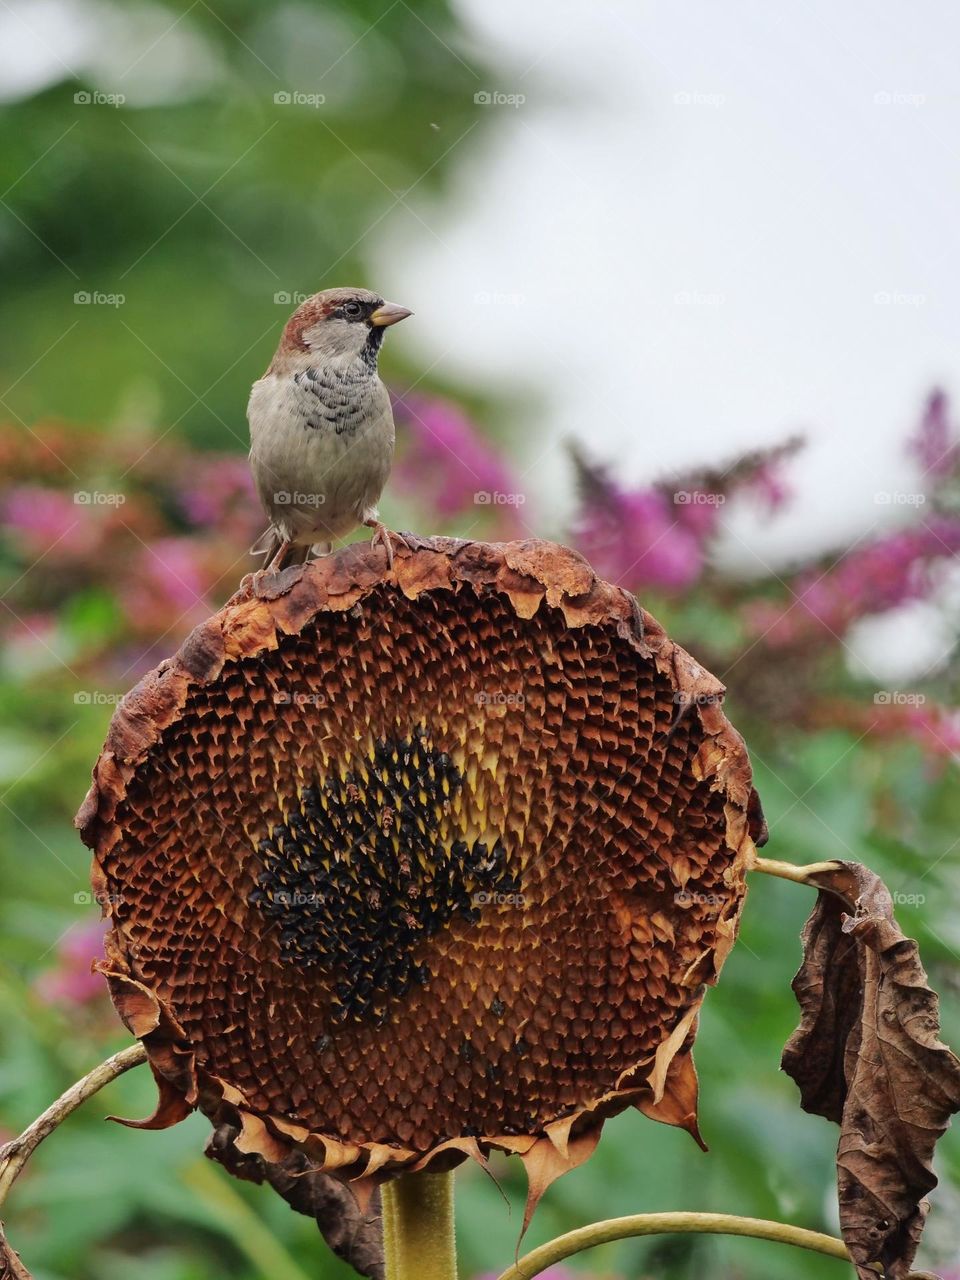 Sparrow searching for seeds